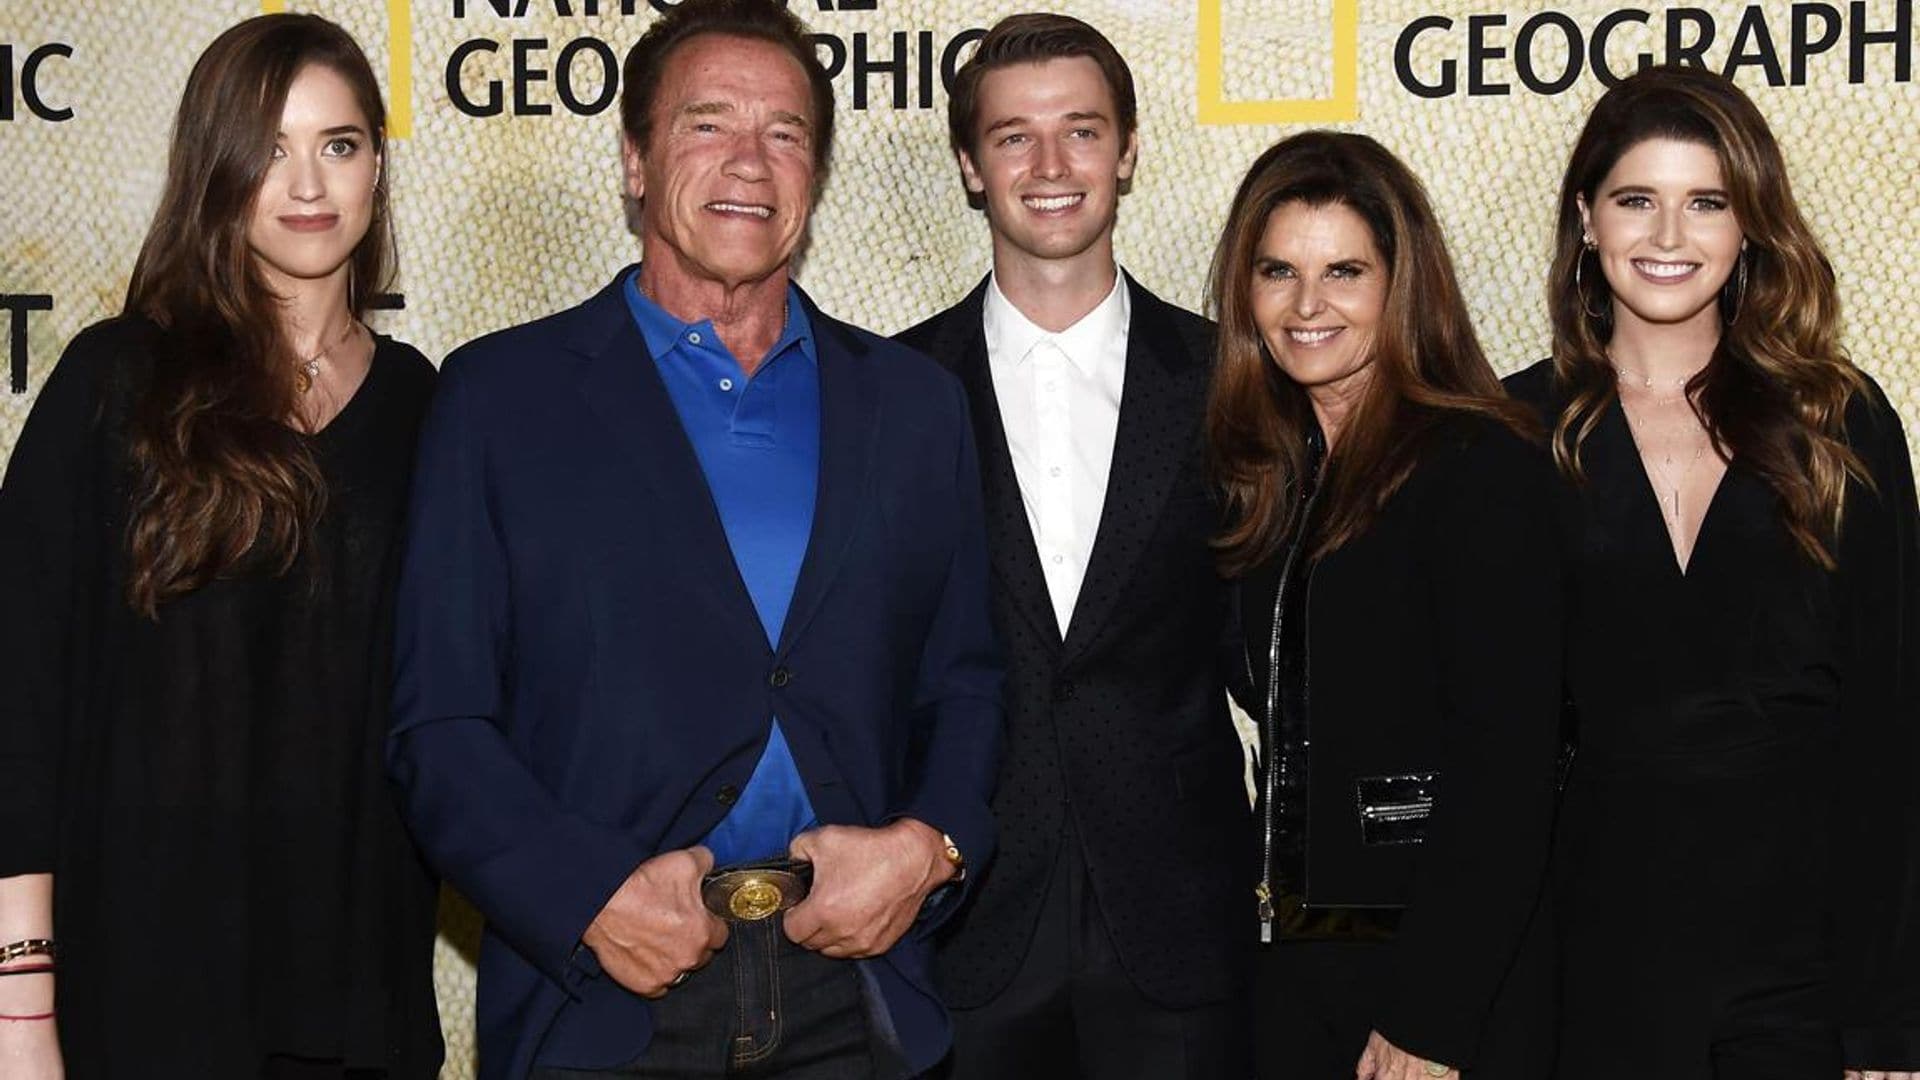 Arnold Schwarzenegger celebrates birthday with his kids and ex-wife: ‘Family time is the best time’